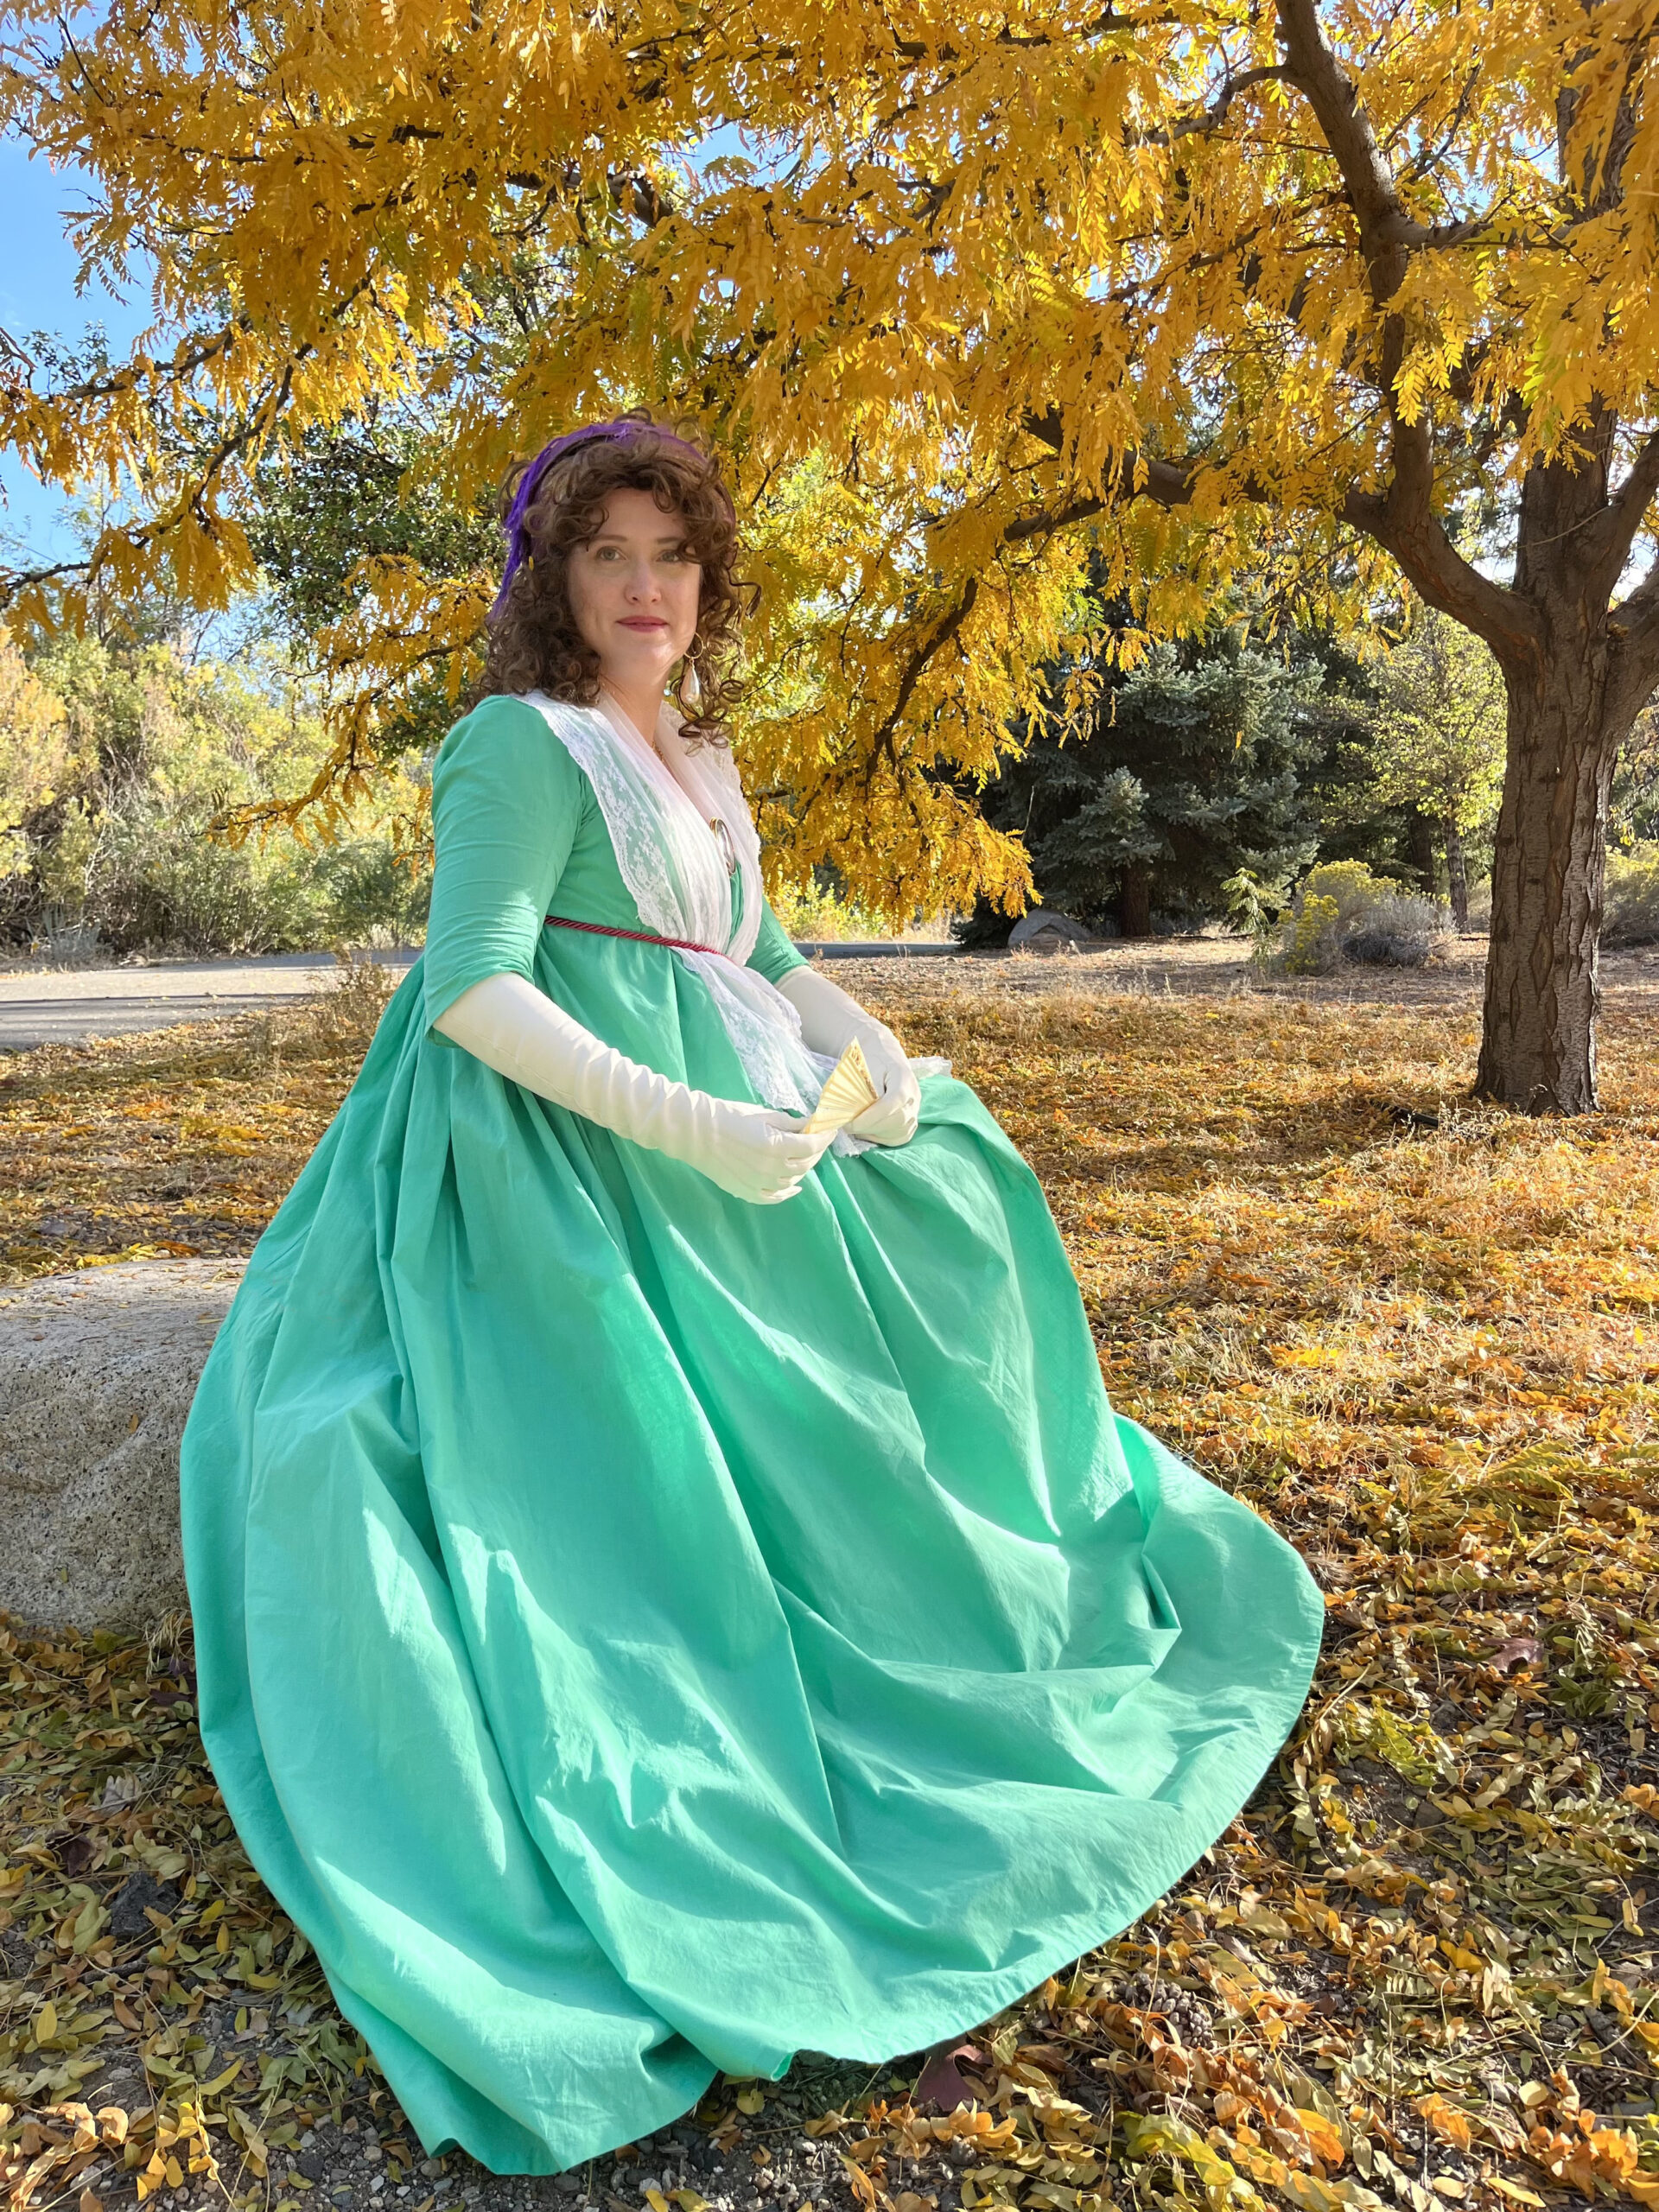 Tabubilgirl in a green 1790s round gown sits beneath a tree with gold autumn leaves.